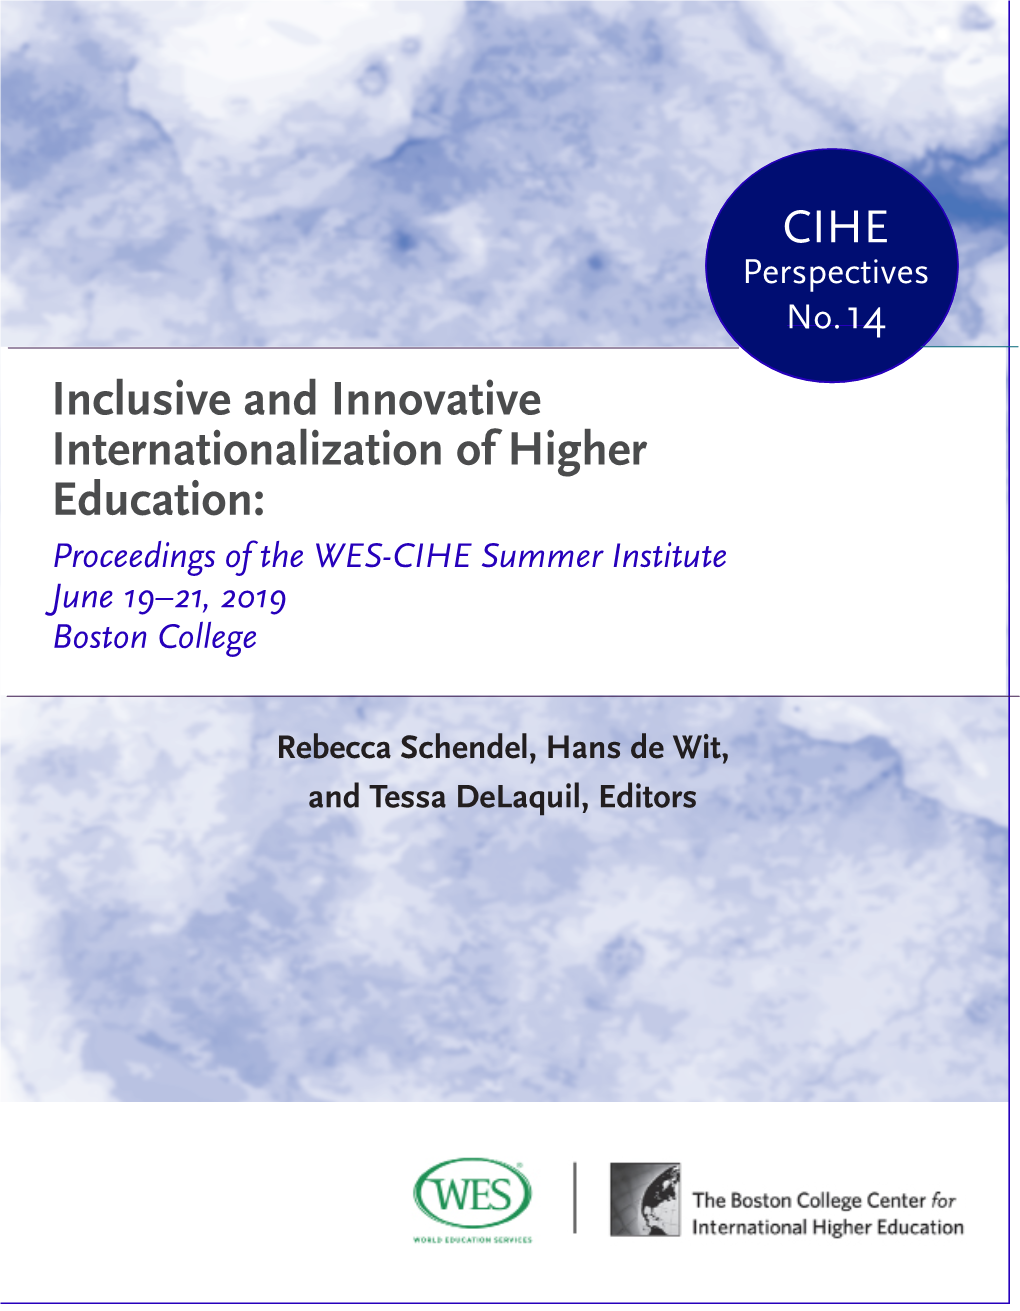 Inclusive and Innovative Internationalization of Higher Education: Proceedings of the WES-CIHE Summer Institute June 19–21, 2019 Boston College